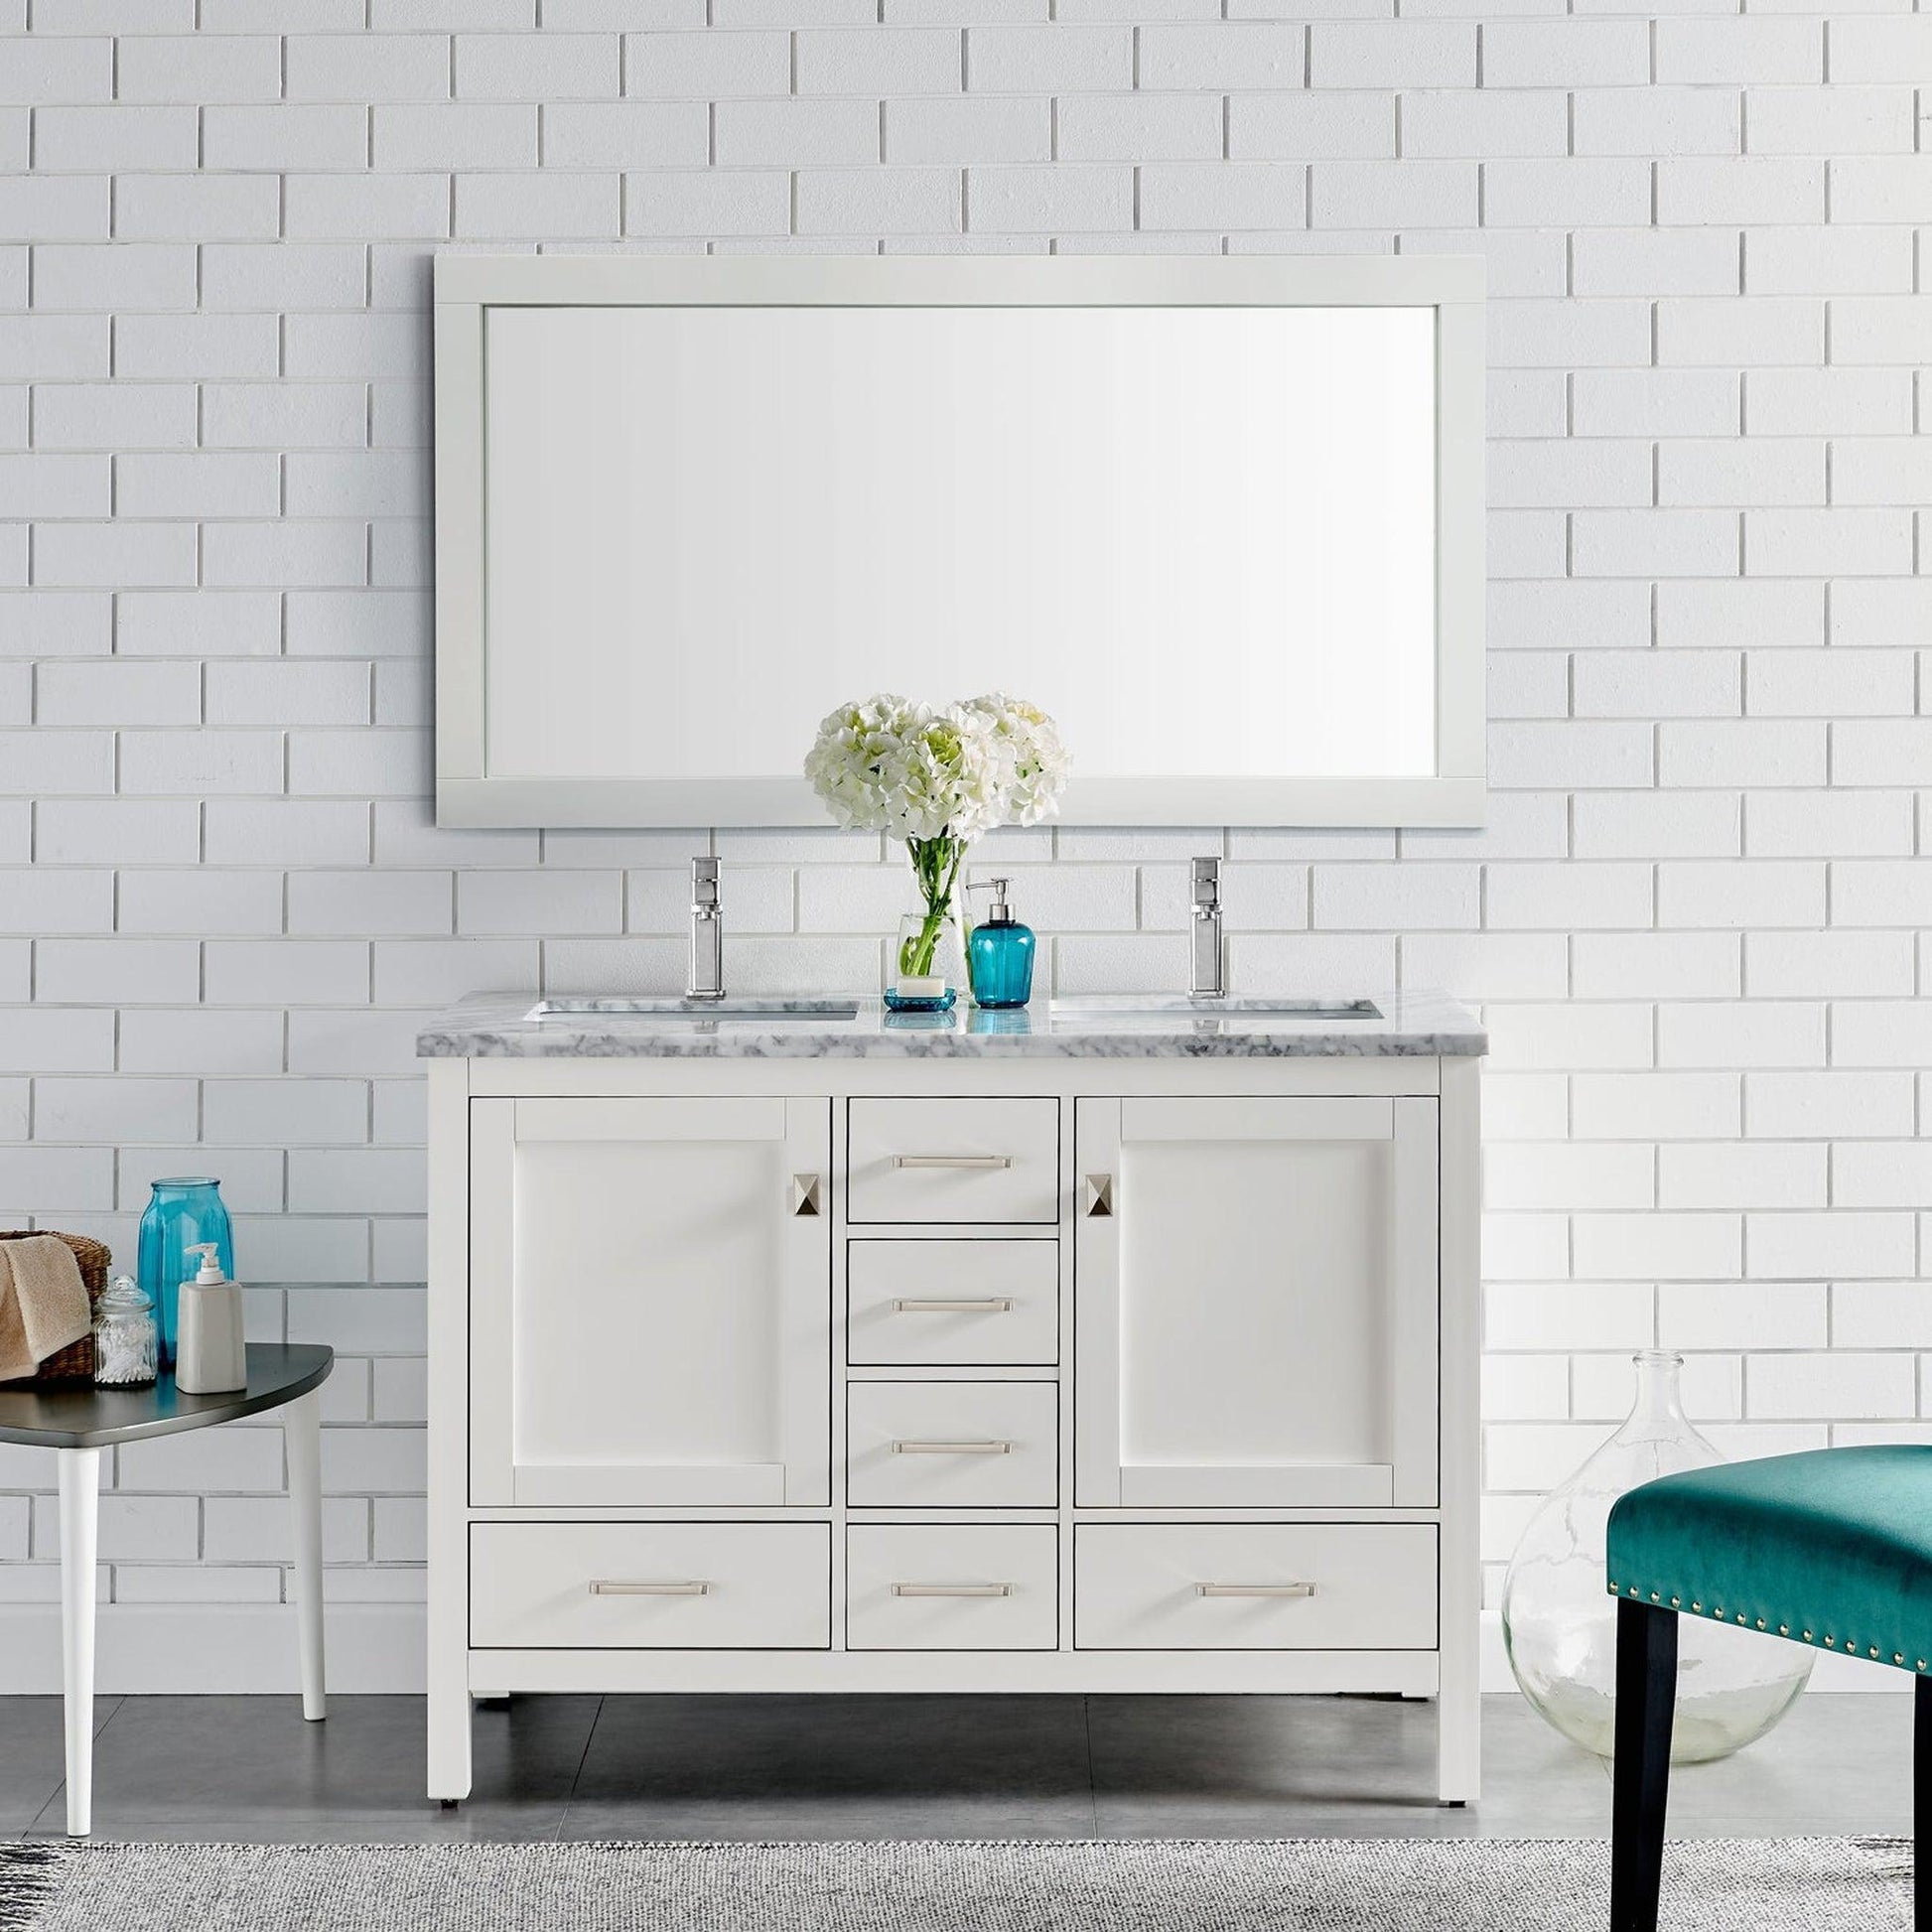 Eviva London 48" x 34" White Freestanding Bathroom Vanity With Carrara Marble Countertop and Double Undermount Sink